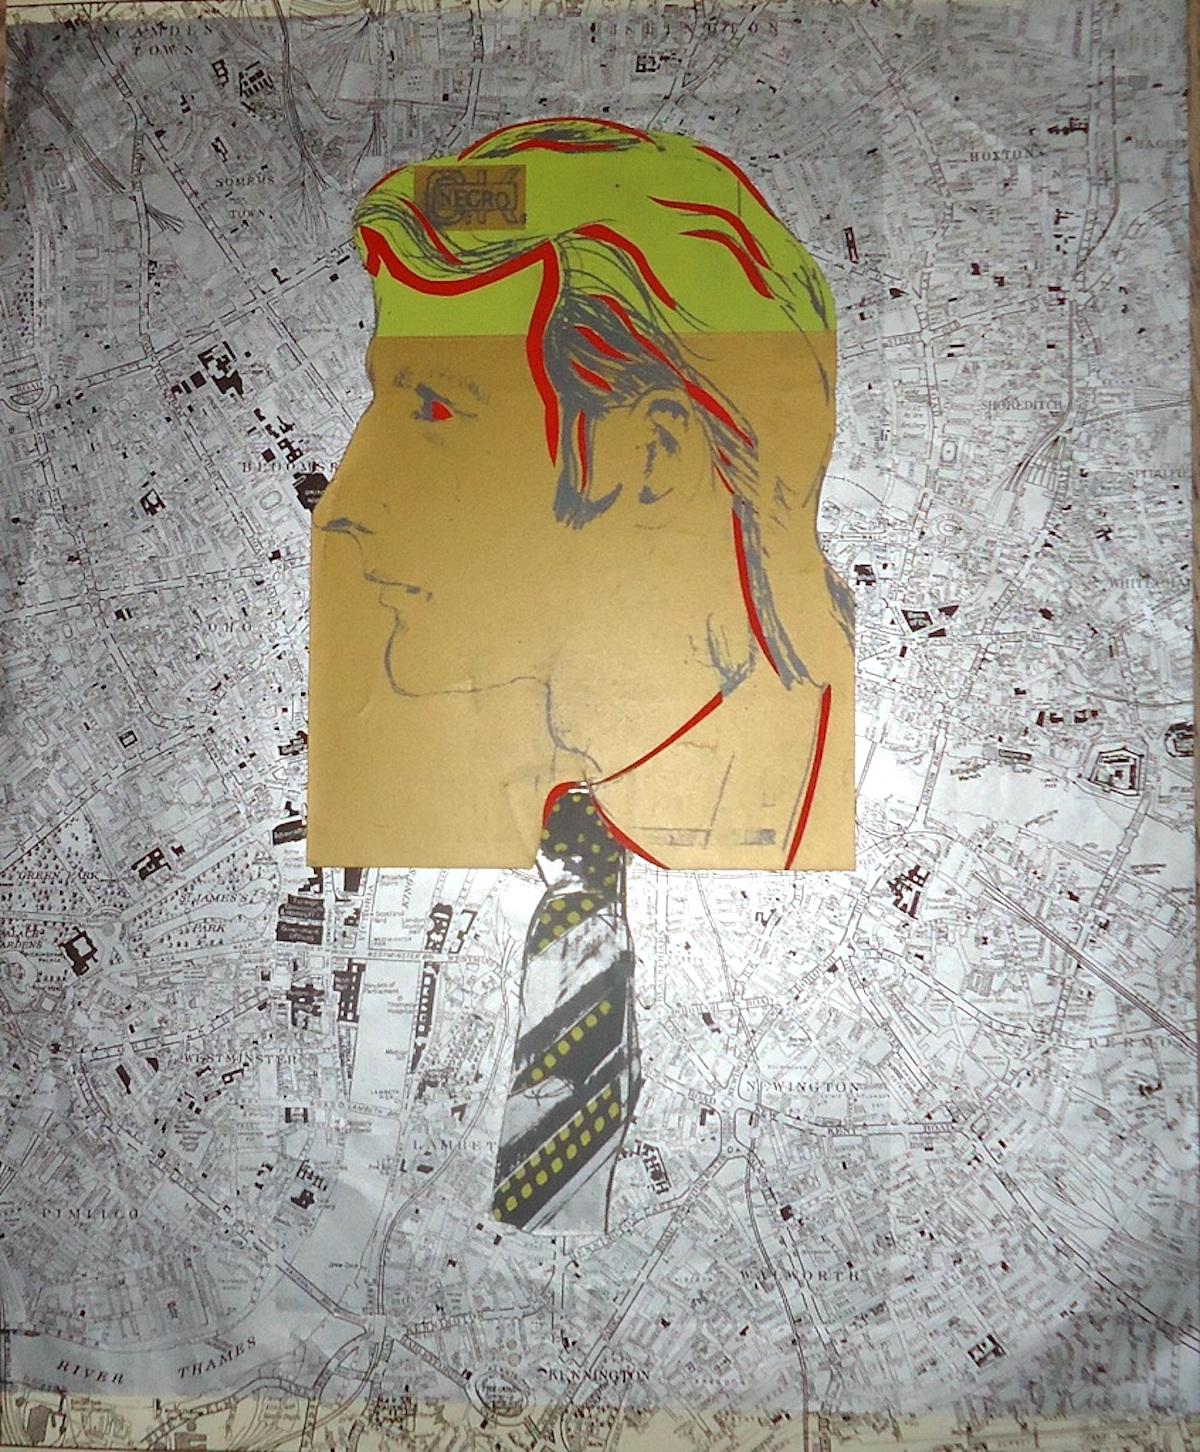 Map with Fraser 1966 in an original screenprint and collage realized by the American artist Larry Rivers in 1966.

Very good conditions.

This print, recalling a Pop Art atmosphere, portrays the profile of a man with a map of London on the